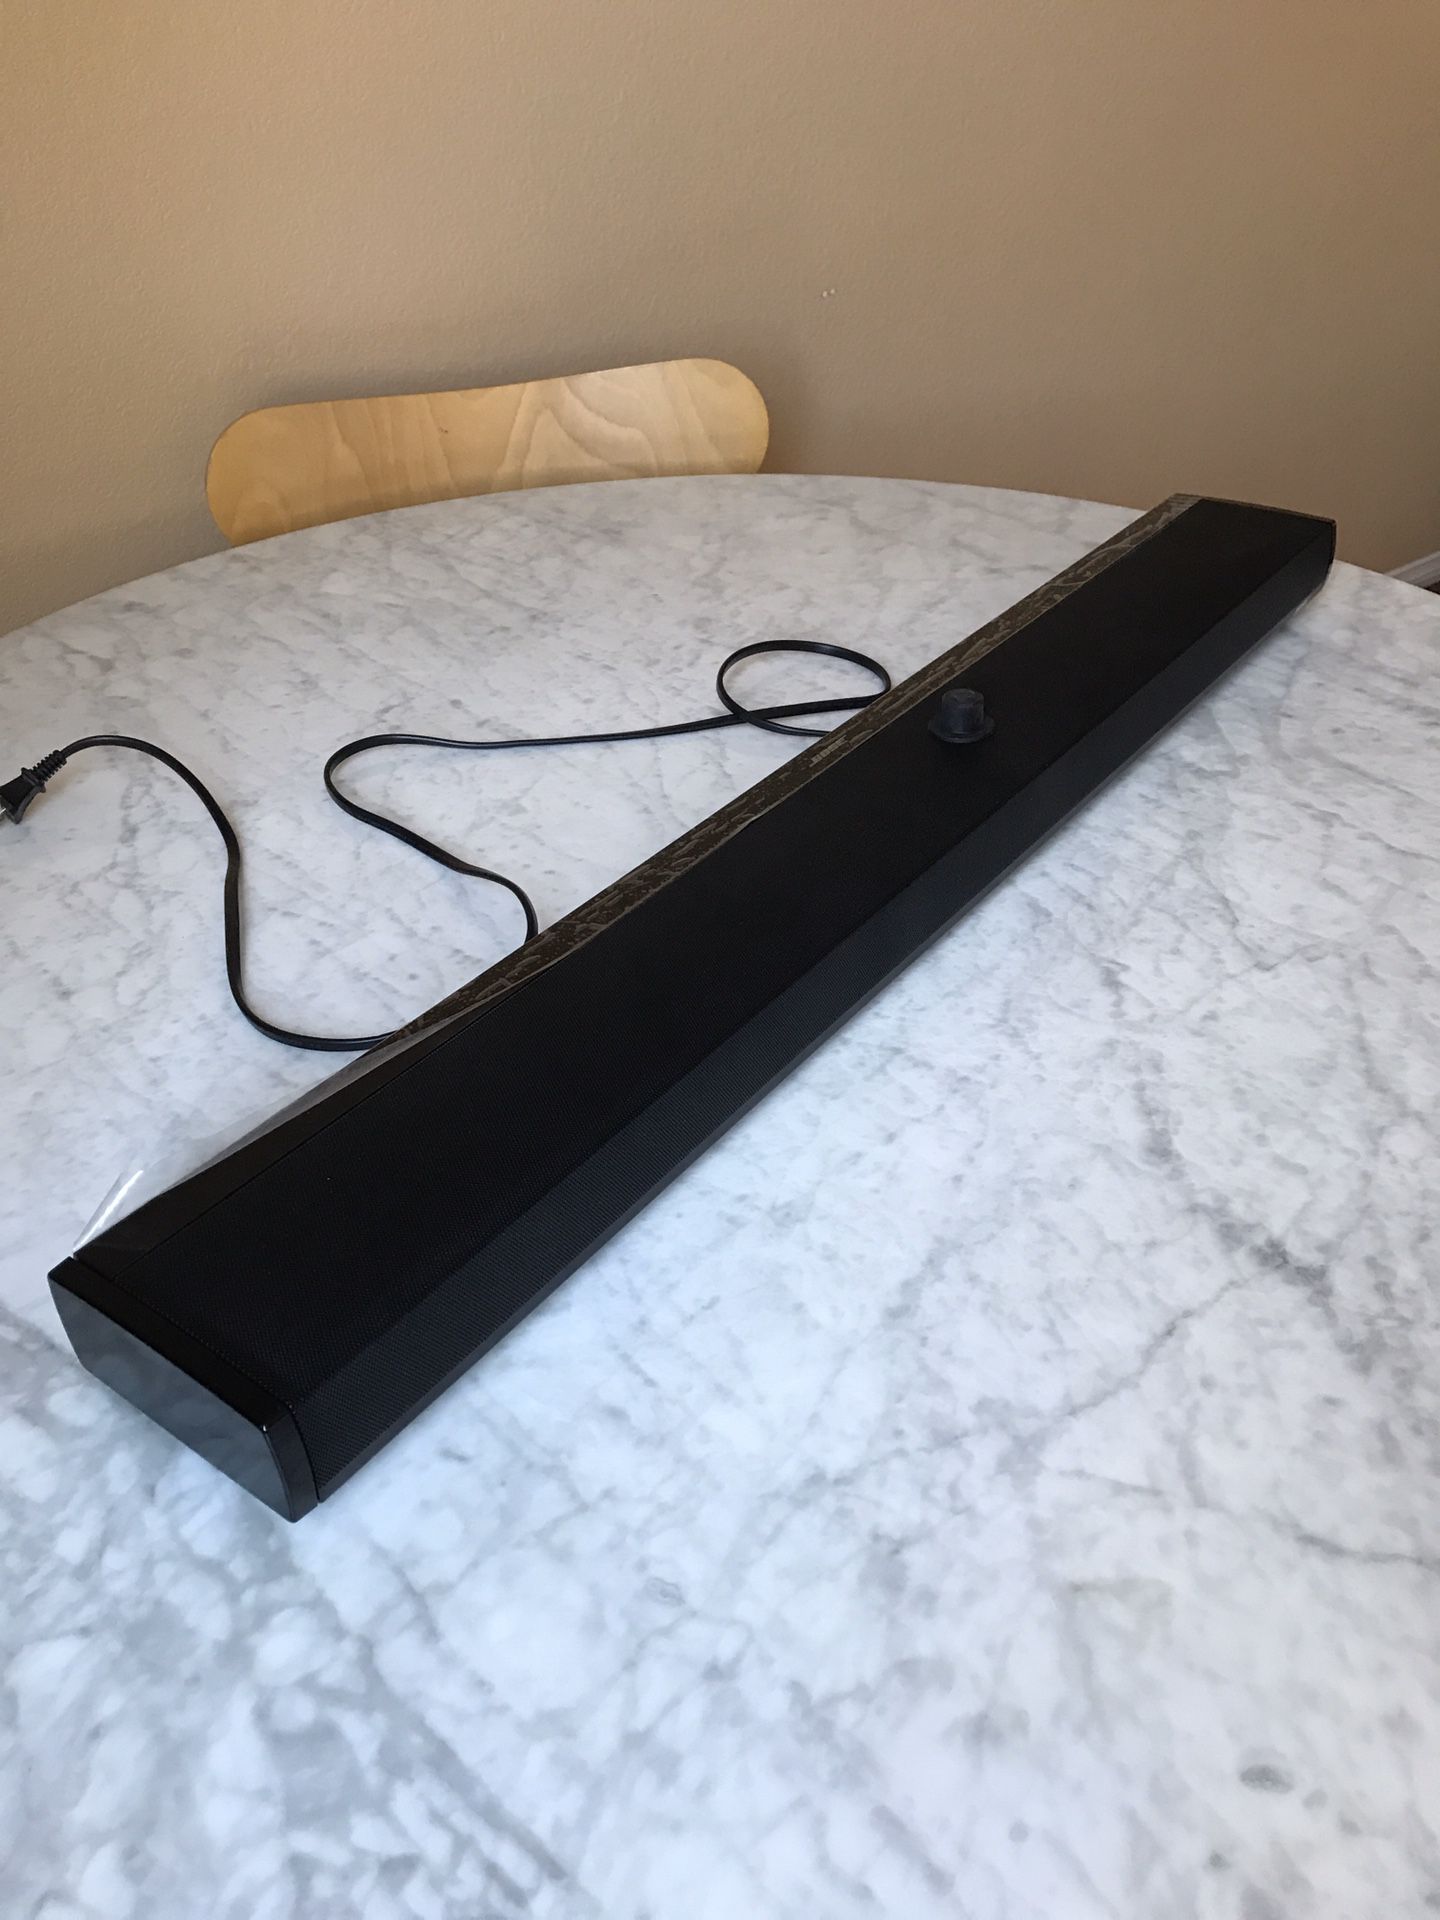 Bose SoundTouch 130 Soundbar only works perfectly